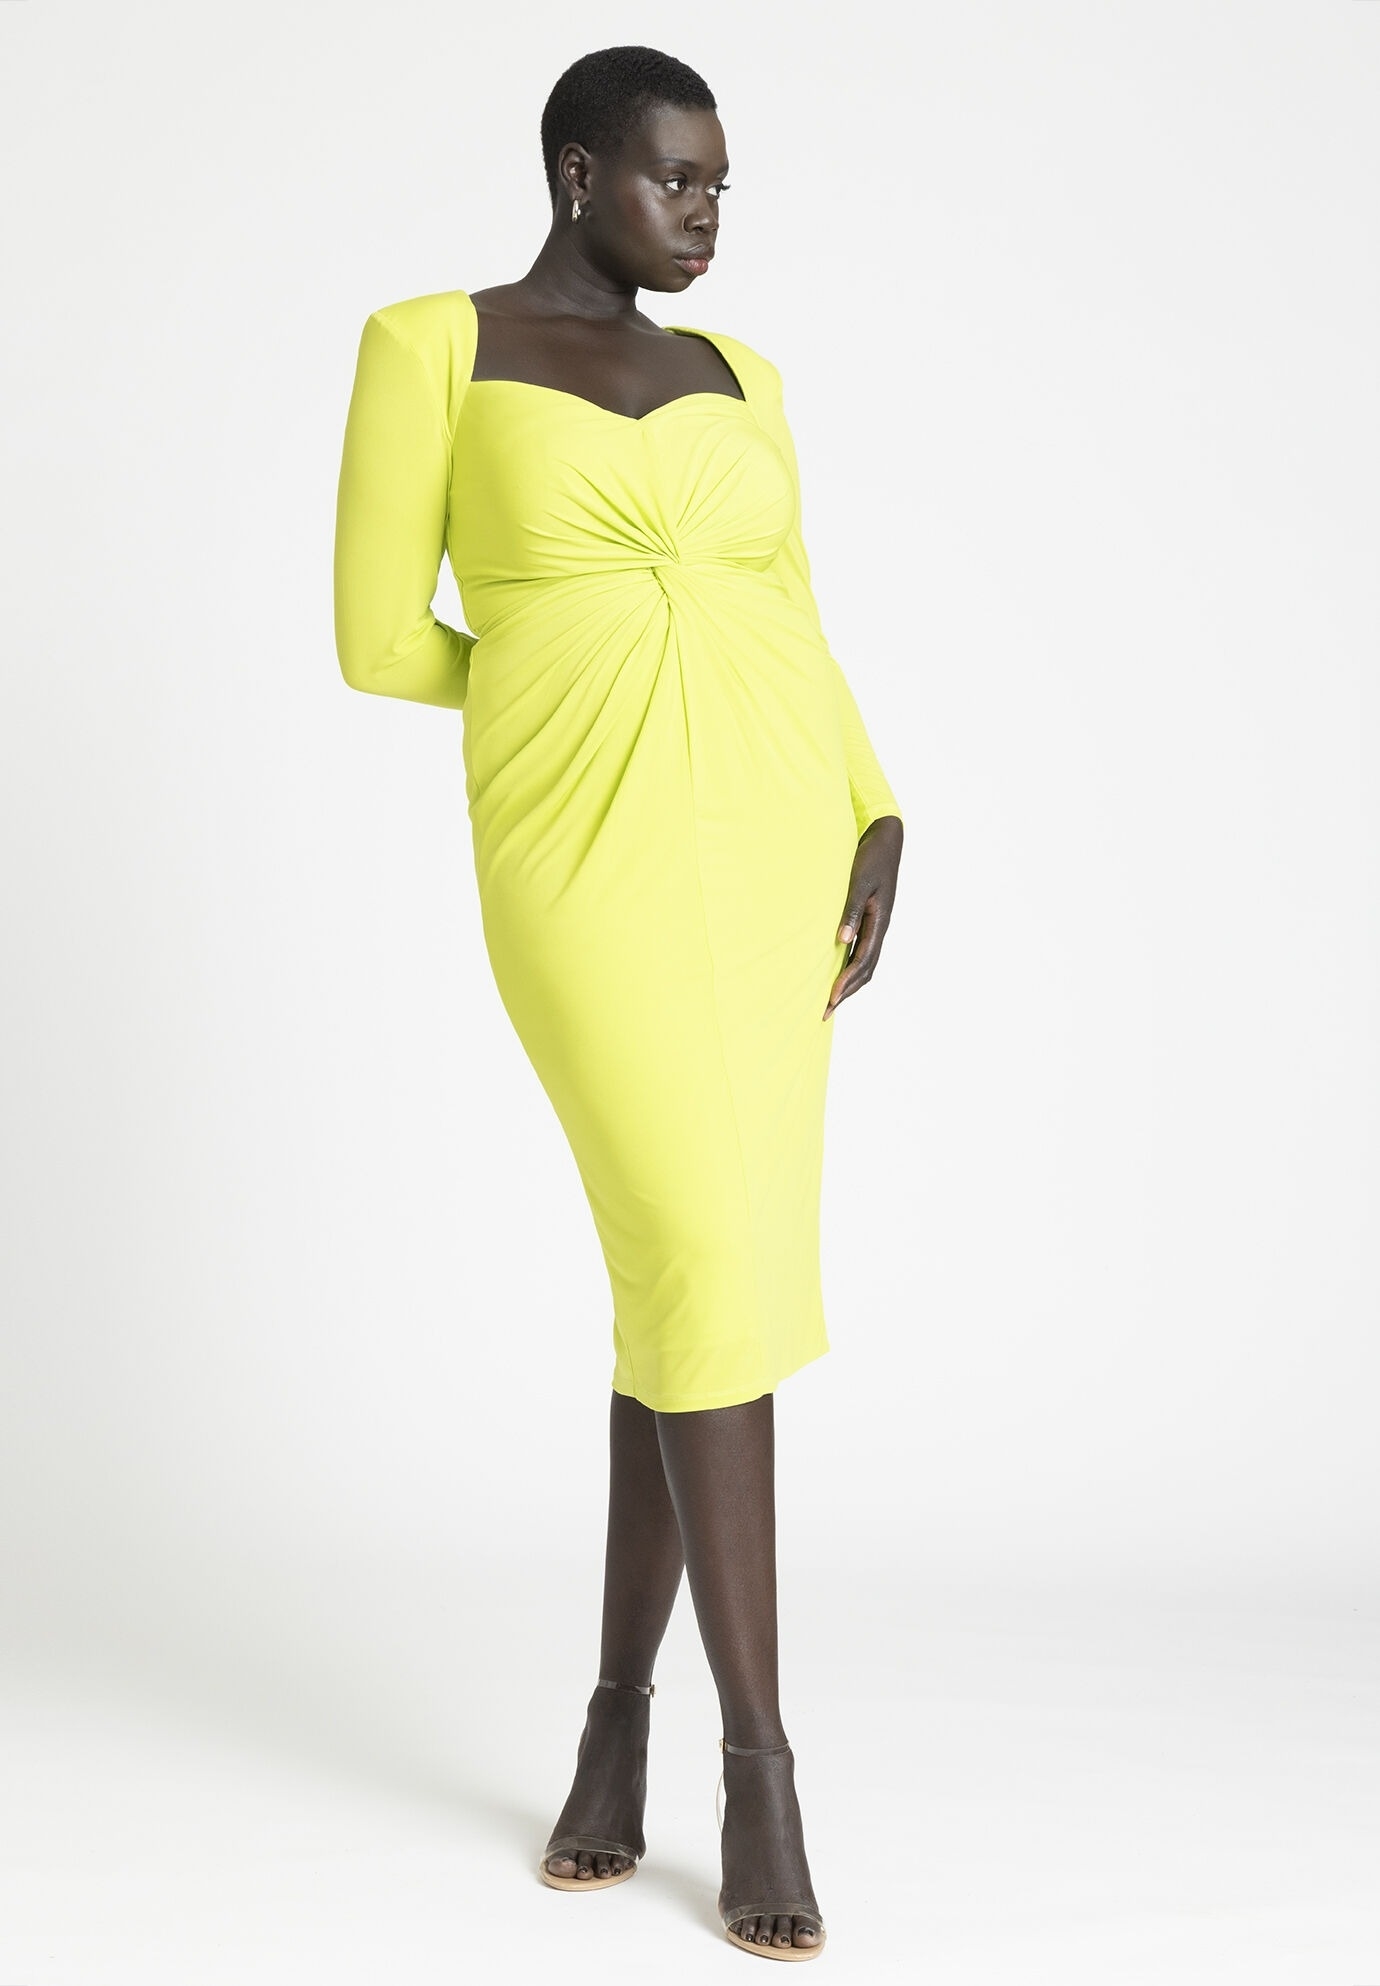 model posing in a stylish bright yellow twist-front knee-length dress with long sleeves